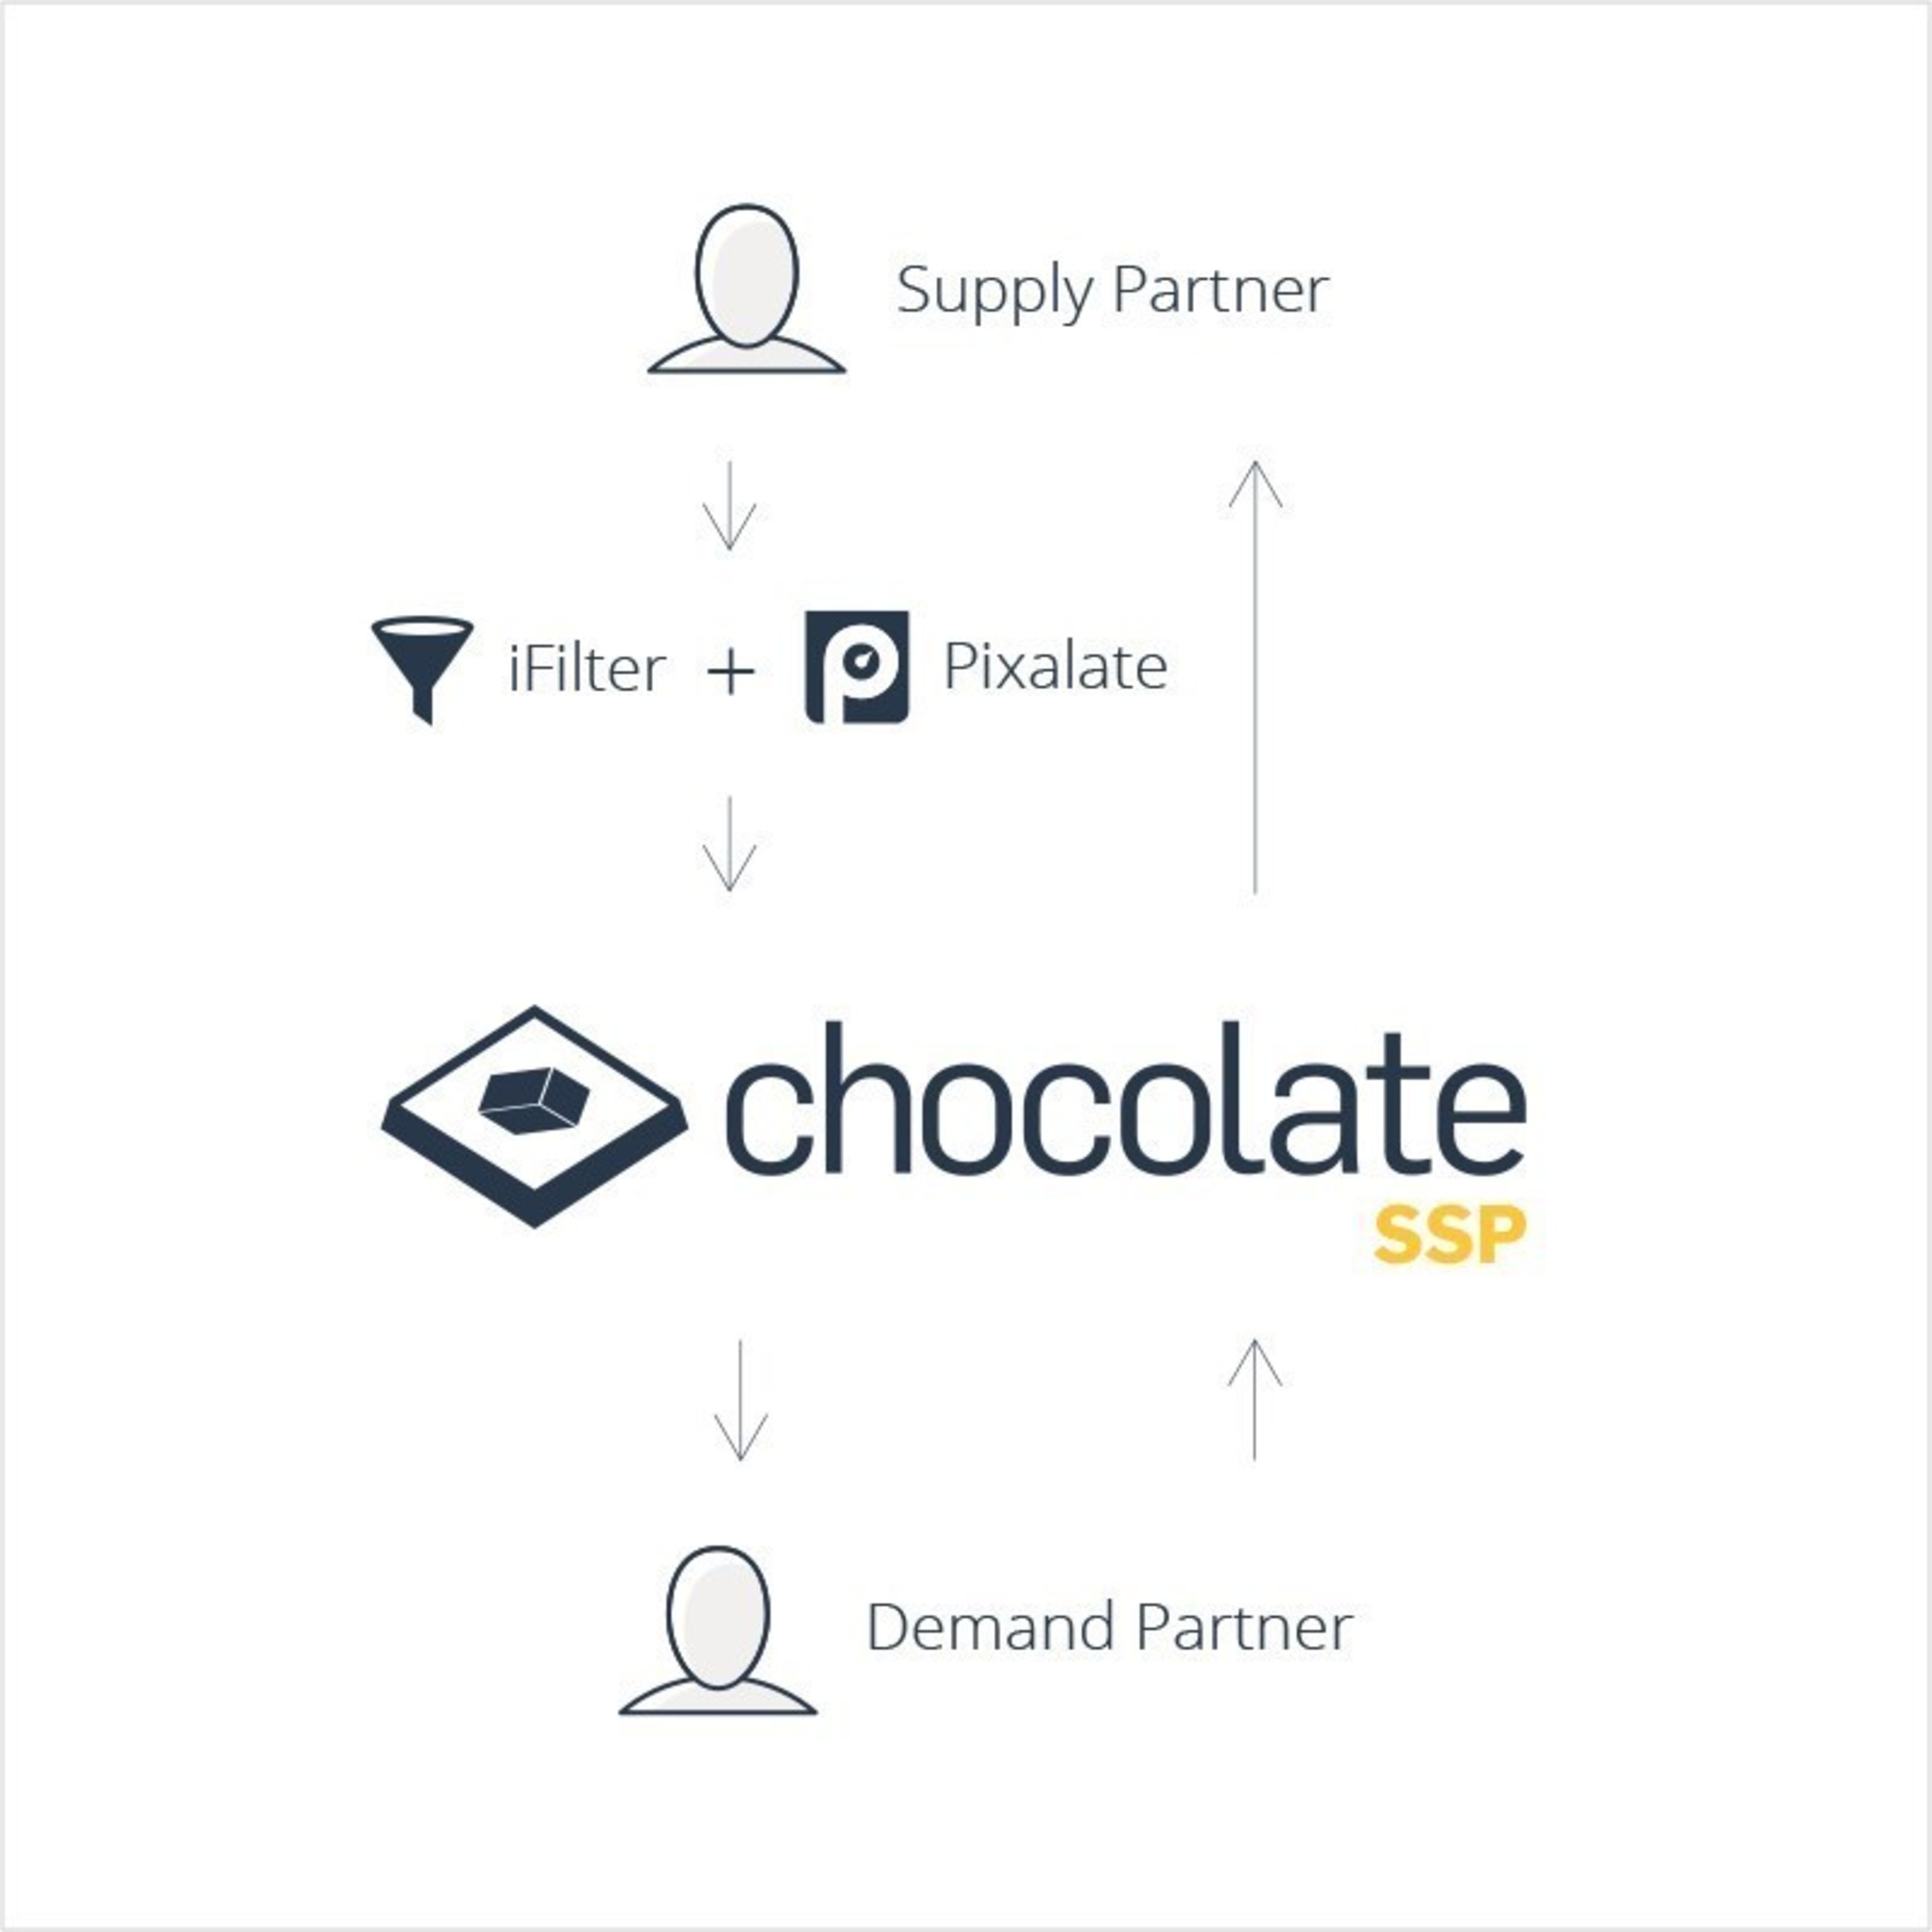 Chocolate by Vdopia teams up with Pixalate for Mobile video marketplace ifilter technology